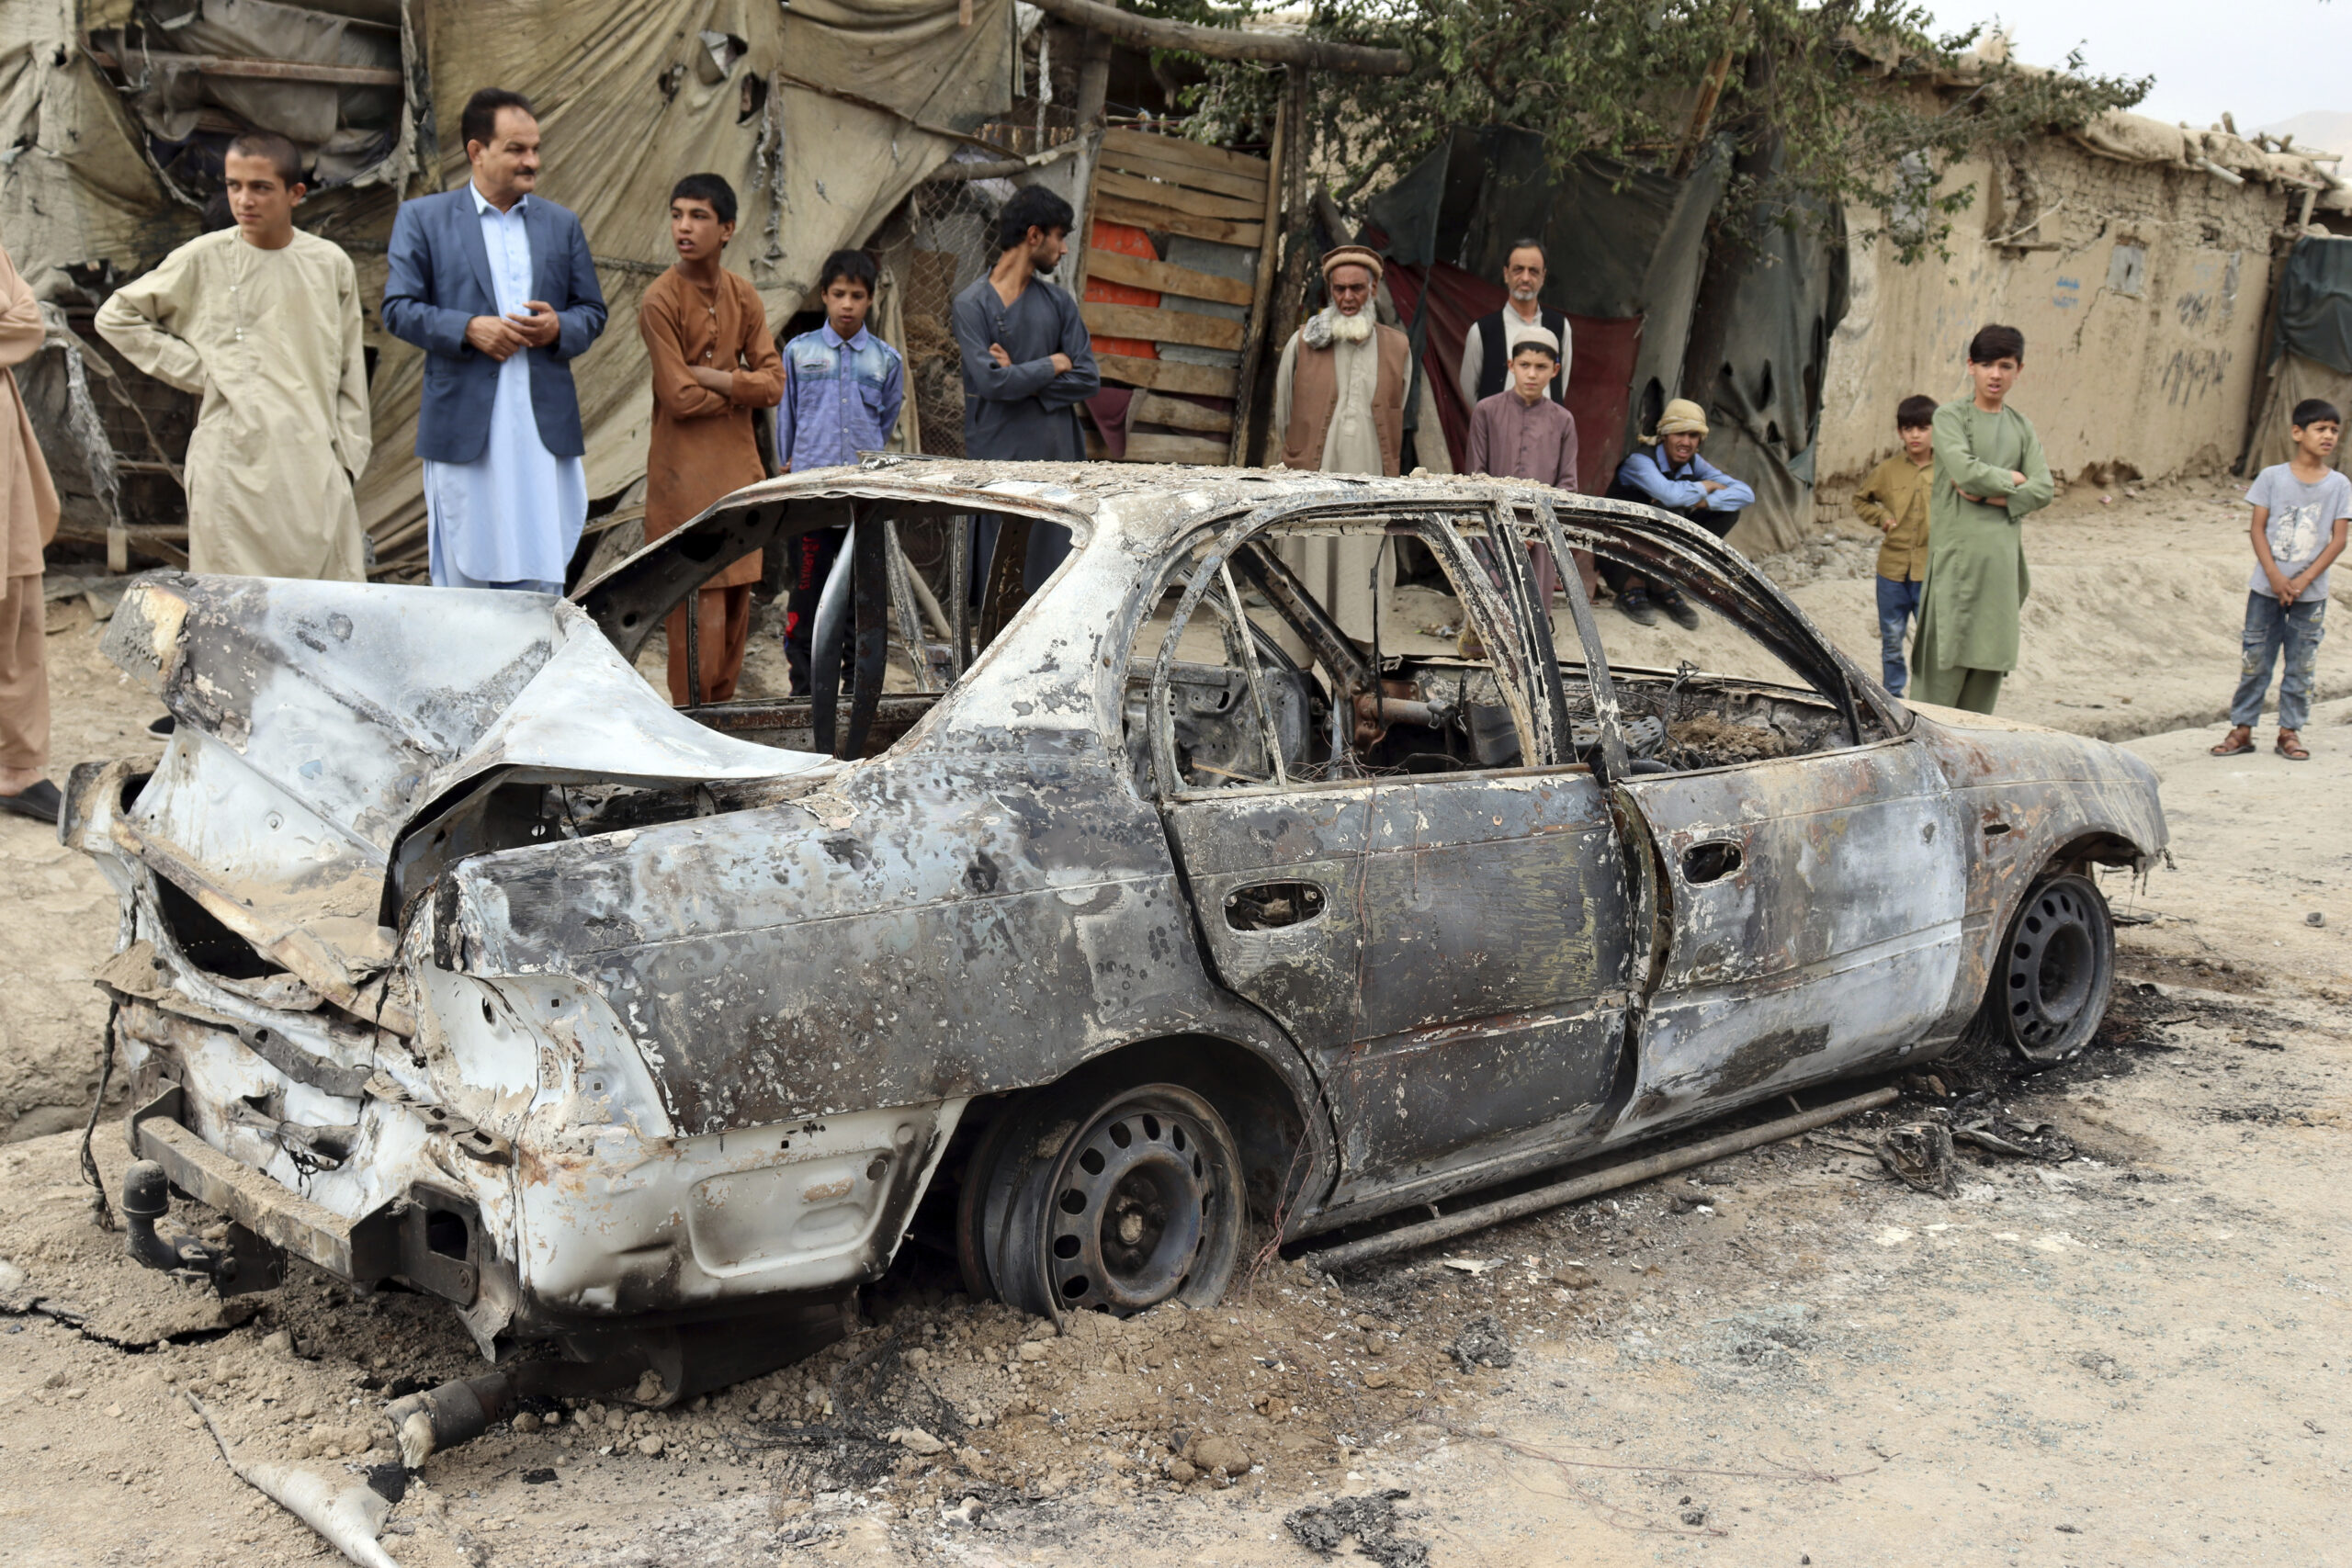 Locals view a vehicle damaged by a rocket attack in Kabul, Afghanistan, Monday, Aug. 30, 2021. Rockets struck a neighborhood near Kabul's international airport on Monday amid the ongoing U.S. withdrawal from Afghanistan. It wasn't immediately clear who launched them. (AP Photo/Khwaja Tawfiq Sediqi)